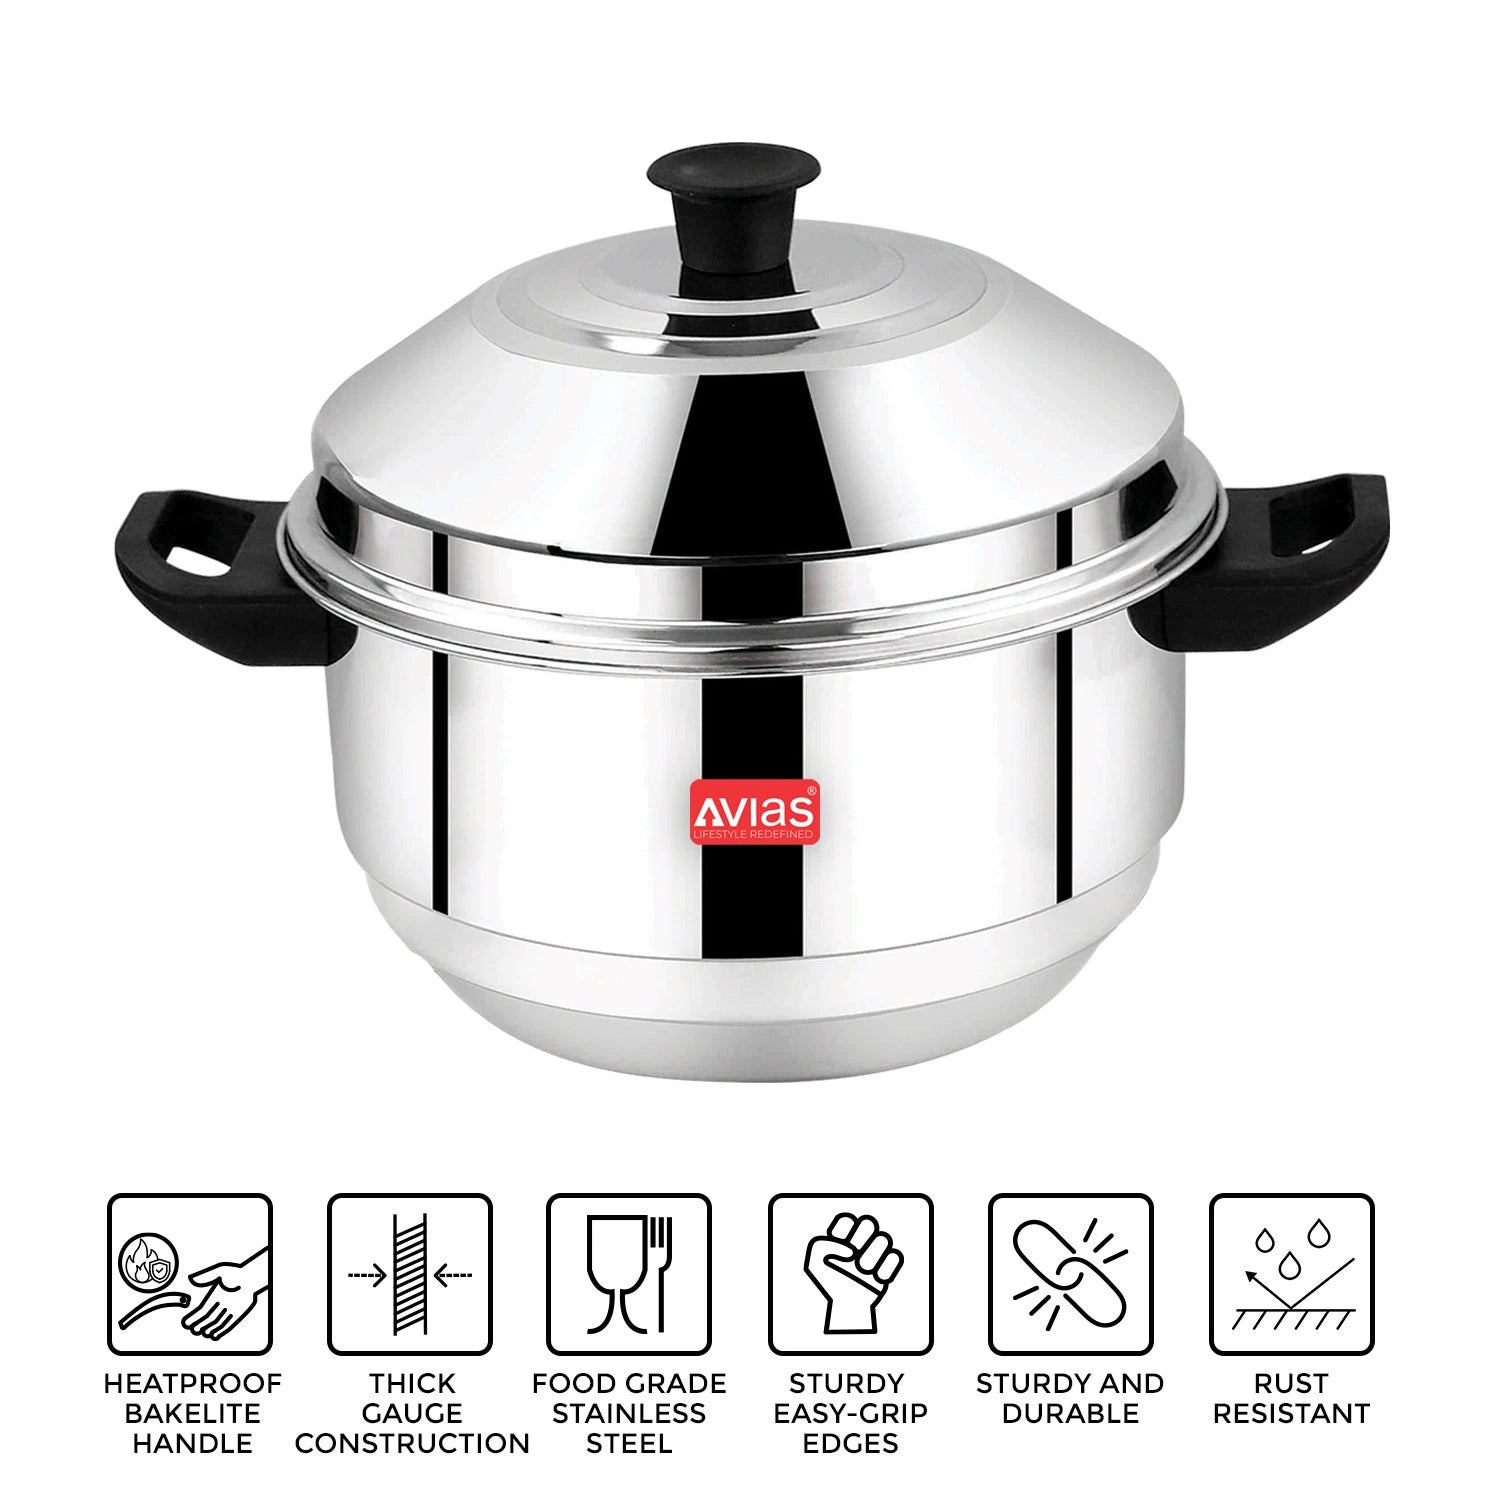 AVIAS Stainless Steel Excello Idly pot/ Cooker/ Maker main features